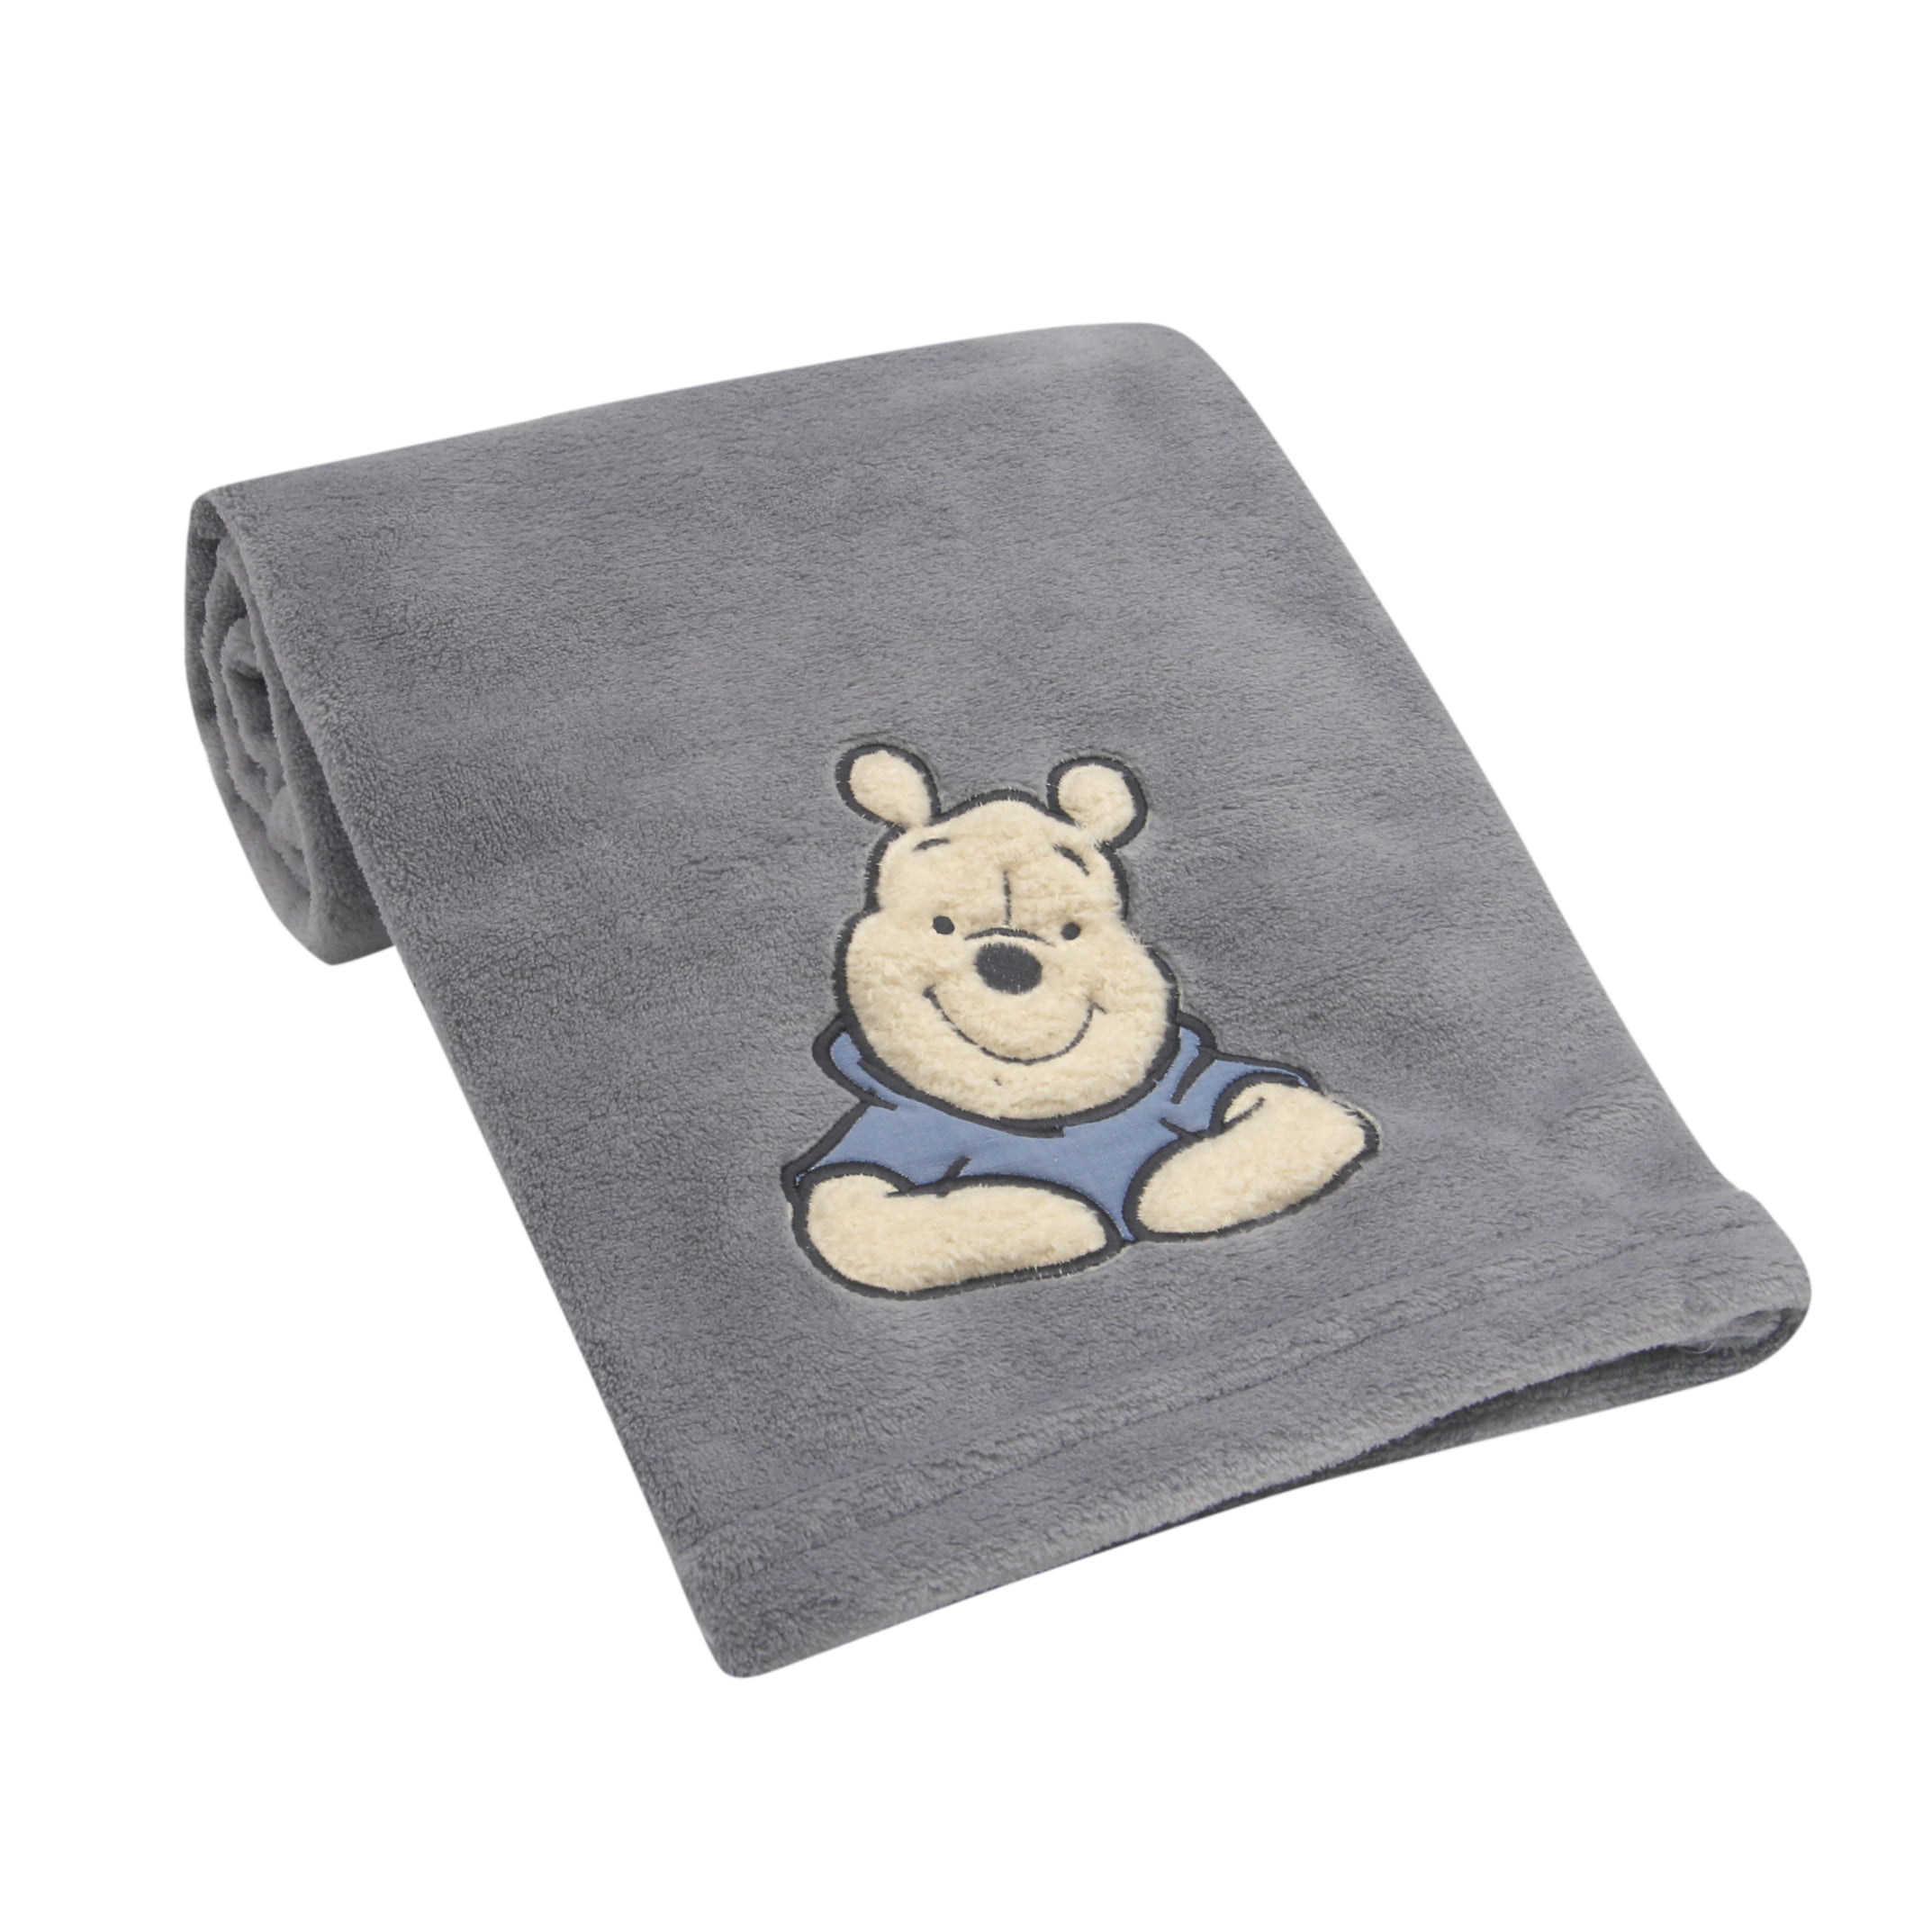 Lambs & Ivy Forever Pooh Baby Blanket - image 2 of 5